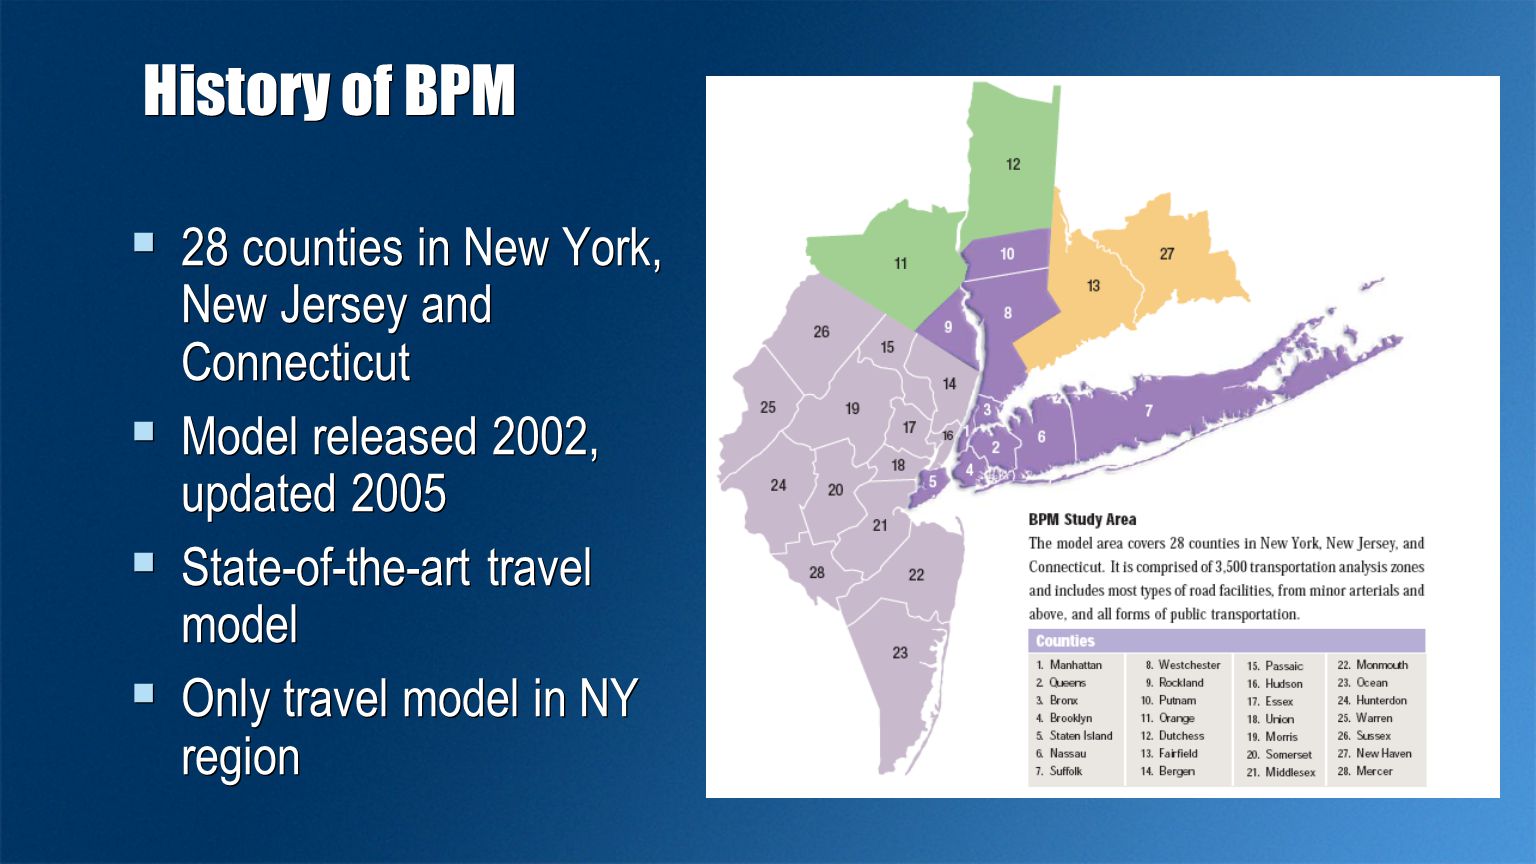 History of BPM  28 counties in New York, New Jersey and Connecticut  Model released 2002, updated 2005  State-of-the-art travel model  Only travel model in NY region  28 counties in New York, New Jersey and Connecticut  Model released 2002, updated 2005  State-of-the-art travel model  Only travel model in NY region